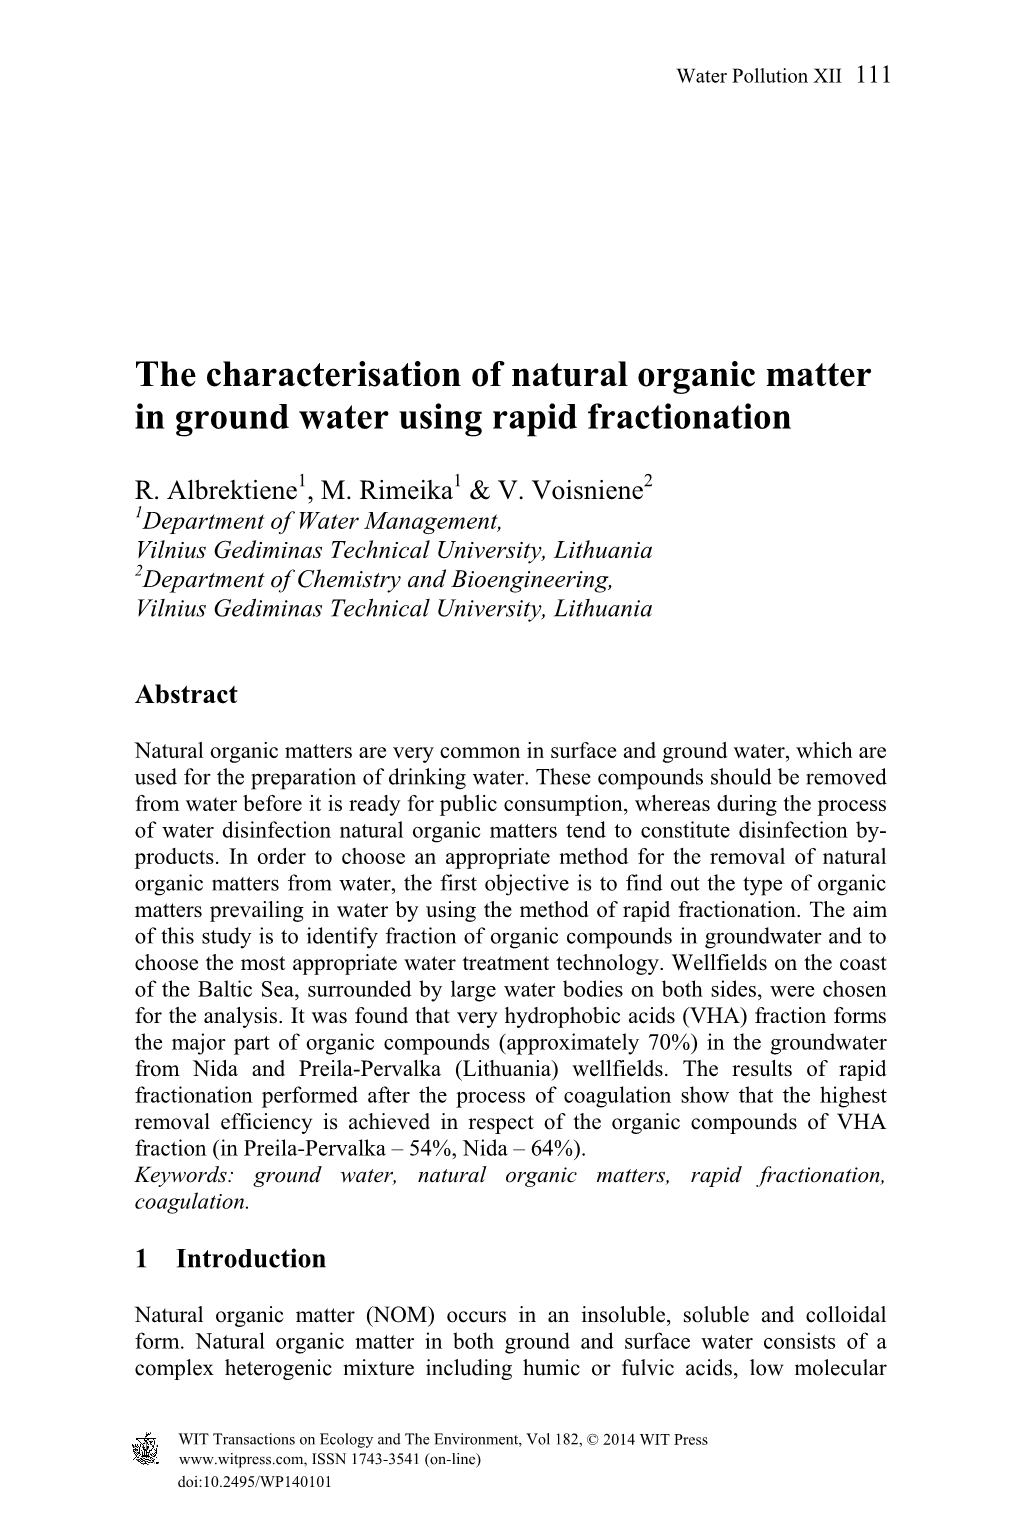 The Characterisation of Natural Organic Matter in Ground Water Using Rapid Fractionation